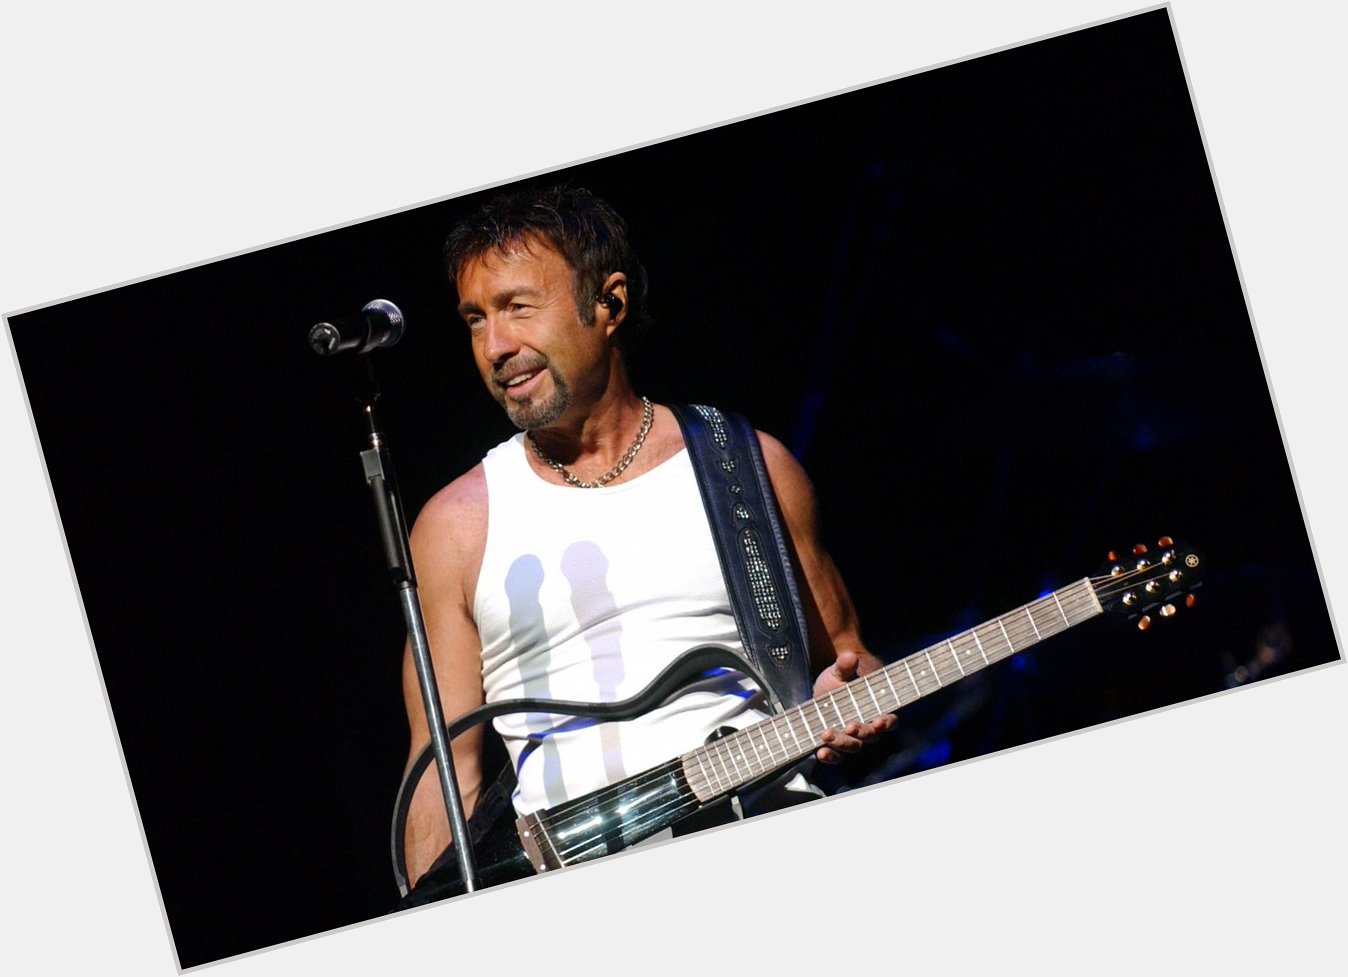 Happy 66th birthday, Paul Rodgers (Free, Bad Company, Queen). 